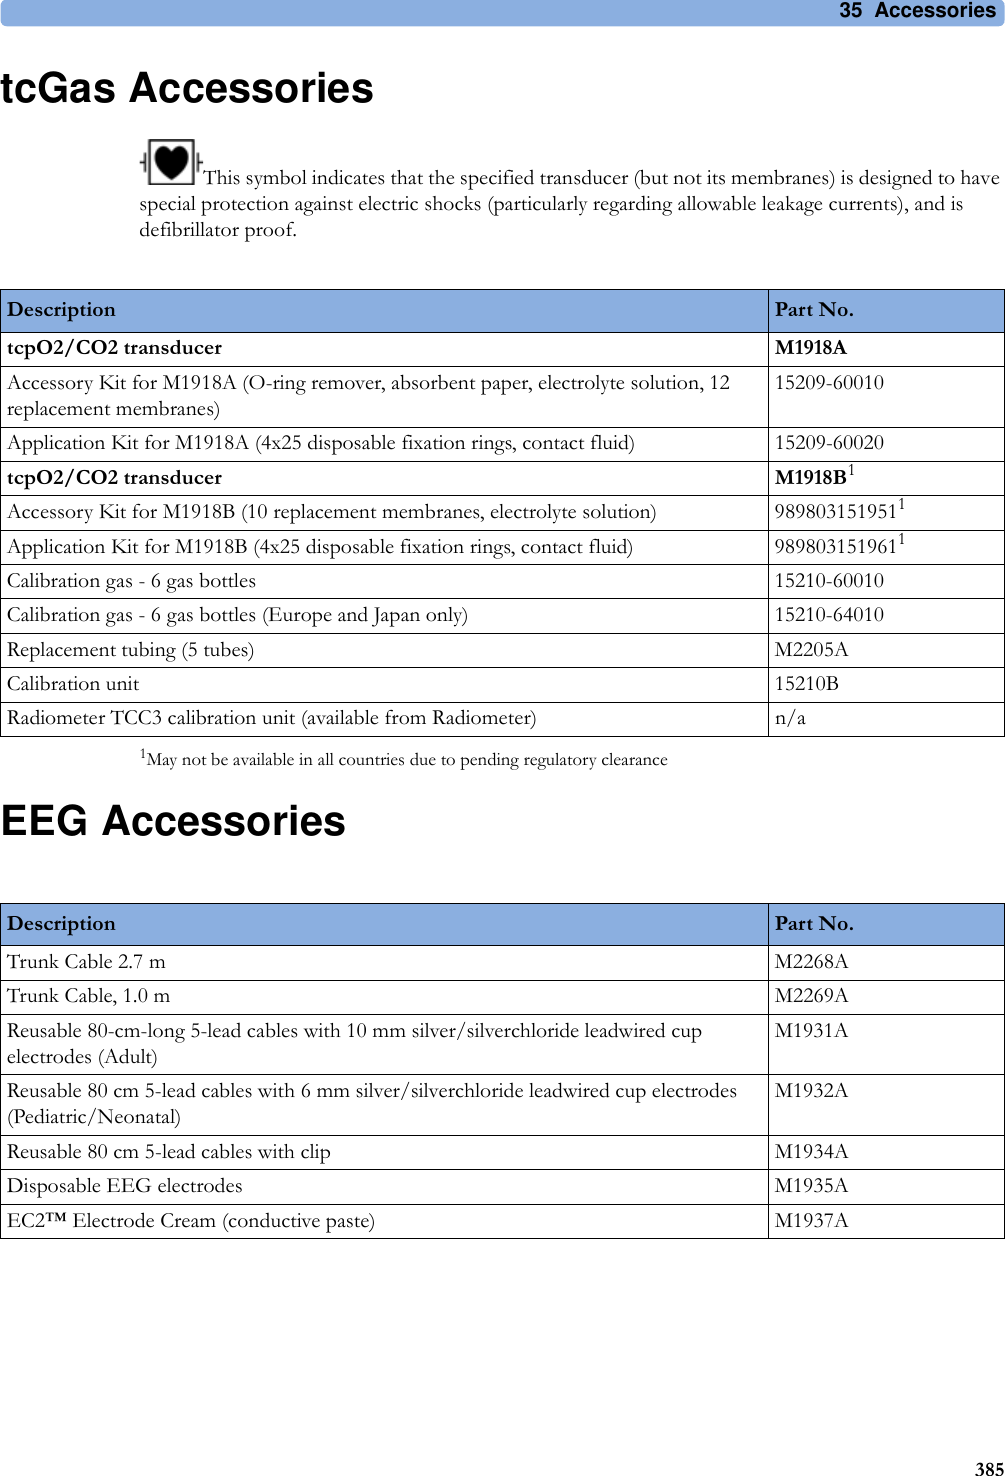 35 Accessories385tcGas AccessoriesThis symbol indicates that the specified transducer (but not its membranes) is designed to have special protection against electric shocks (particularly regarding allowable leakage currents), and is defibrillator proof.1May not be available in all countries due to pending regulatory clearanceEEG AccessoriesDescription Part No.tcpO2/CO2 transducer M1918AAccessory Kit for M1918A (O-ring remover, absorbent paper, electrolyte solution, 12 replacement membranes)15209-60010Application Kit for M1918A (4x25 disposable fixation rings, contact fluid) 15209-60020tcpO2/CO2 transducer M1918B1Accessory Kit for M1918B (10 replacement membranes, electrolyte solution) 9898031519511Application Kit for M1918B (4x25 disposable fixation rings, contact fluid) 9898031519611Calibration gas - 6 gas bottles 15210-60010Calibration gas - 6 gas bottles (Europe and Japan only) 15210-64010Replacement tubing (5 tubes) M2205ACalibration unit 15210BRadiometer TCC3 calibration unit (available from Radiometer) n/aDescription Part No.Trunk Cable 2.7 m M2268ATrunk Cable, 1.0 m M2269AReusable 80-cm-long 5-lead cables with 10 mm silver/silverchloride leadwired cup electrodes (Adult)M1931AReusable 80 cm 5-lead cables with 6 mm silver/silverchloride leadwired cup electrodes (Pediatric/Neonatal)M1932AReusable 80 cm 5-lead cables with clip M1934ADisposable EEG electrodes M1935AEC2™ Electrode Cream (conductive paste) M1937A